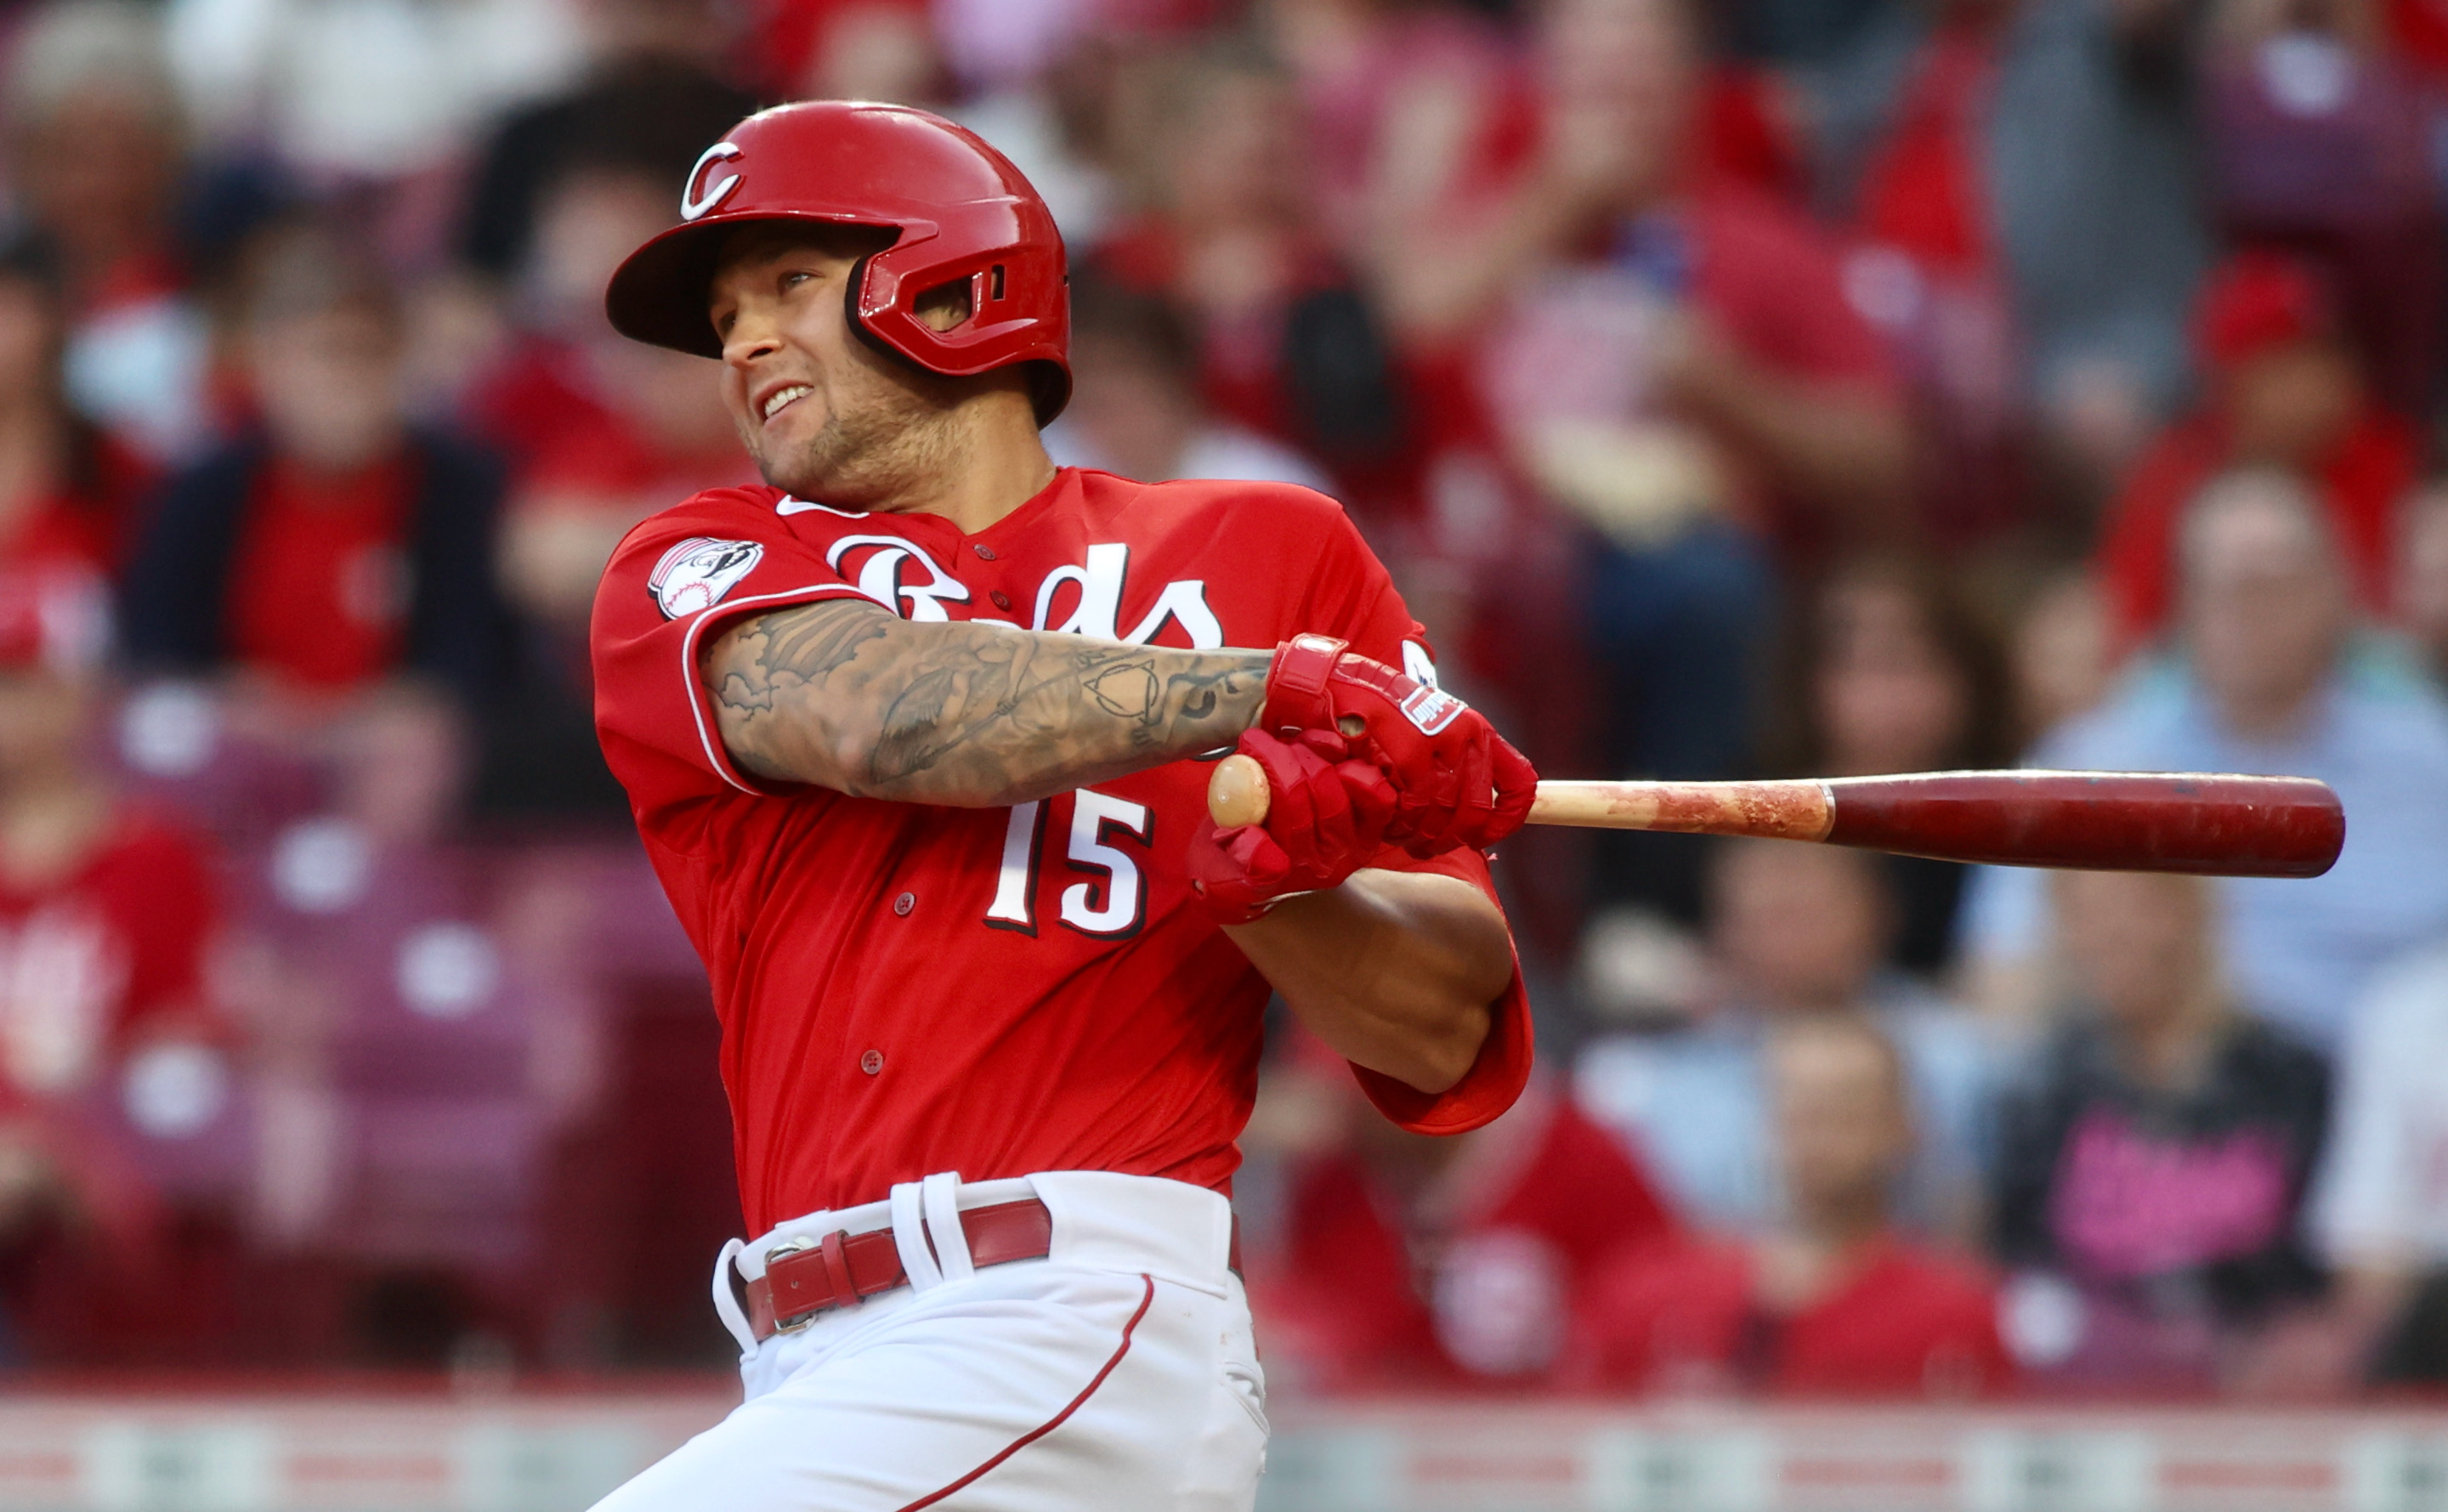 Reds: Has TJ Friedl supplanted Jonathan India as the leadoff hitter